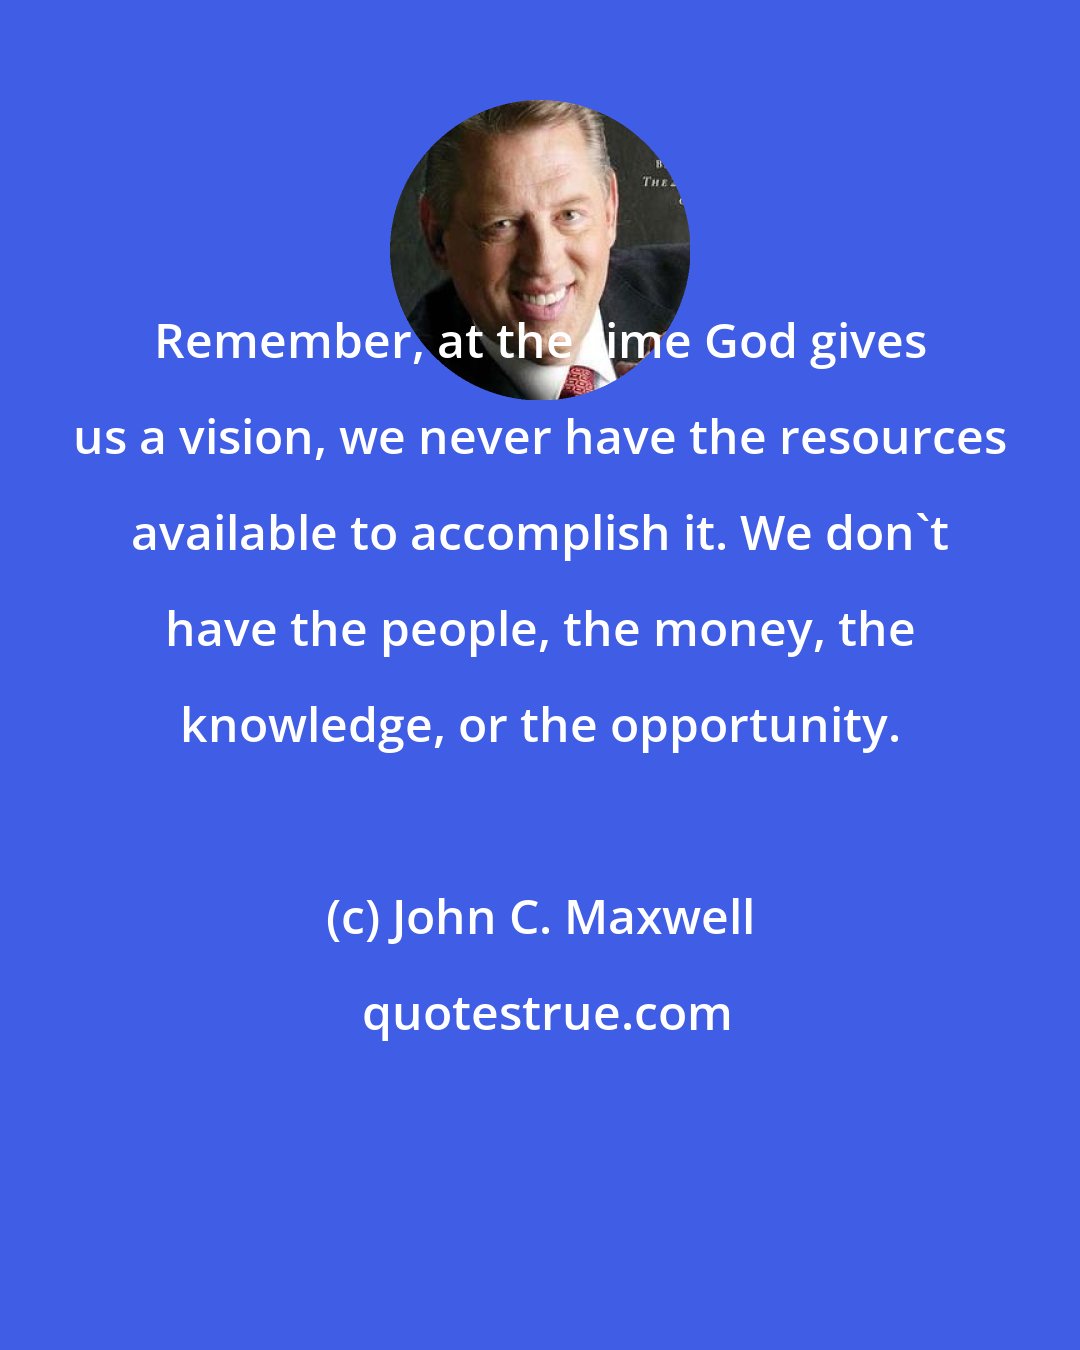 John C. Maxwell: Remember, at the time God gives us a vision, we never have the resources available to accomplish it. We don't have the people, the money, the knowledge, or the opportunity.